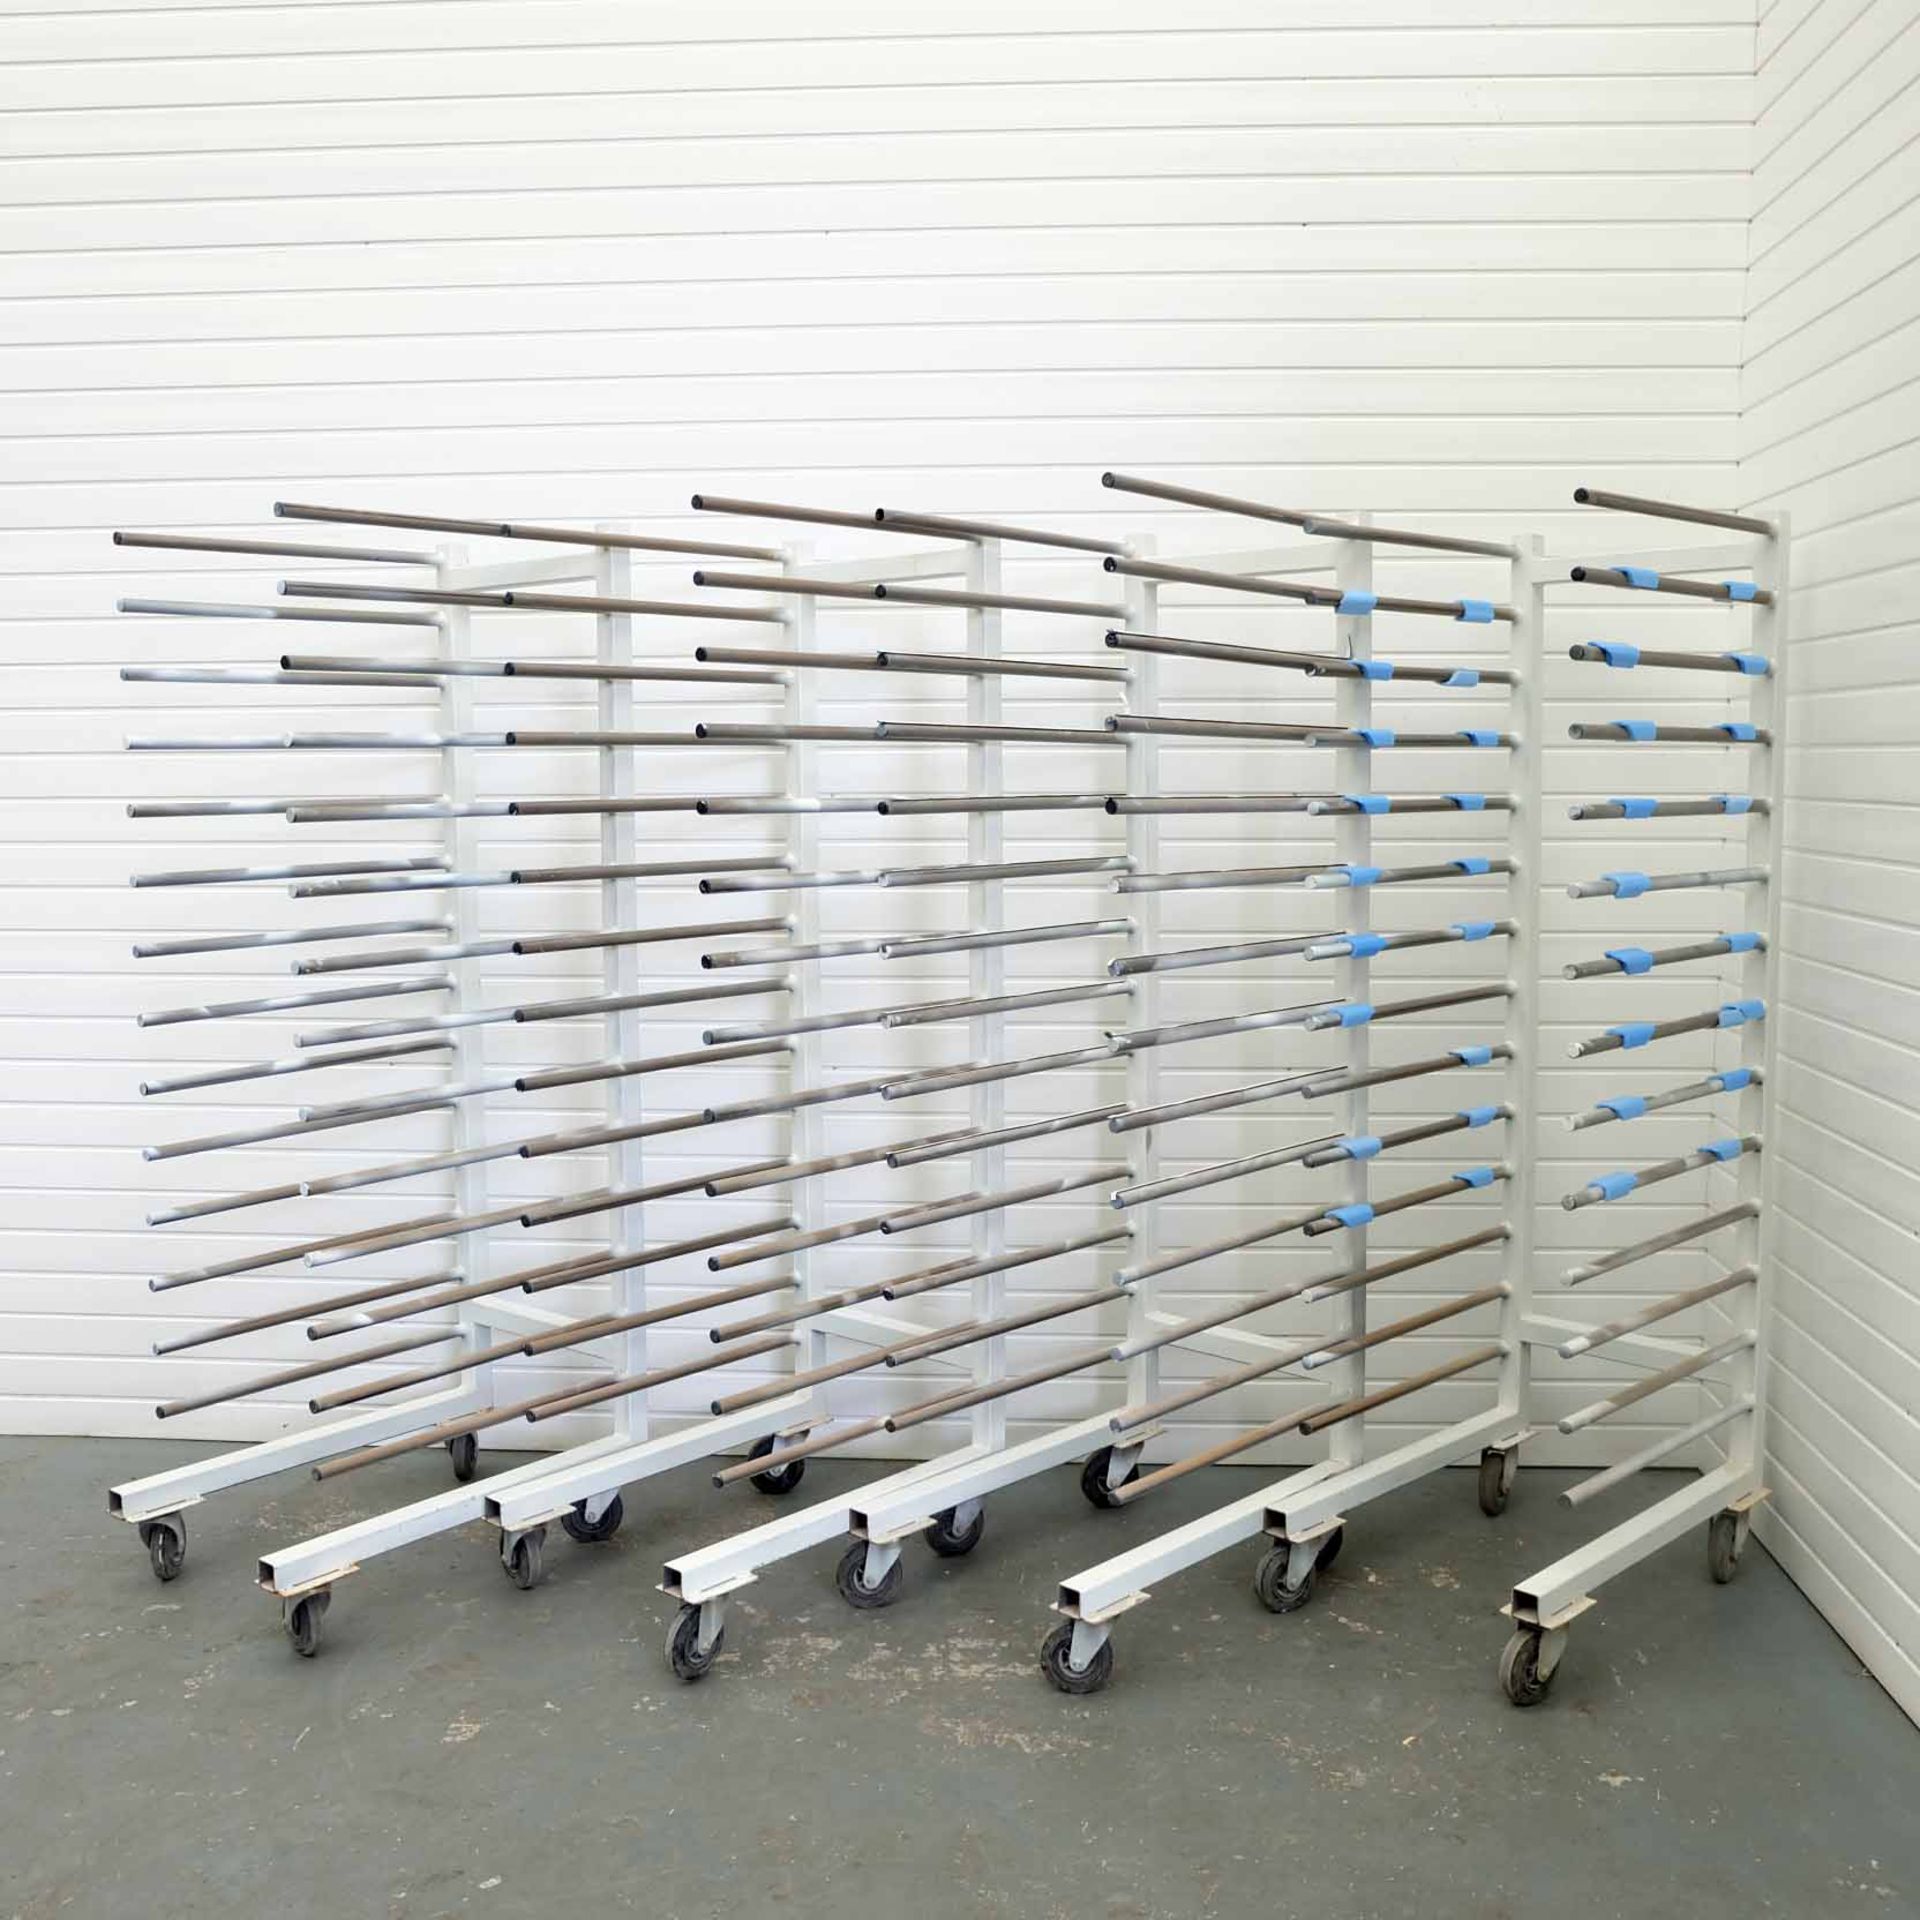 4 x Mobile Drying Racks. 14 x Pairs of Bars. Depth of 700mm. Bar Centres 520mm. Height 2000mm.